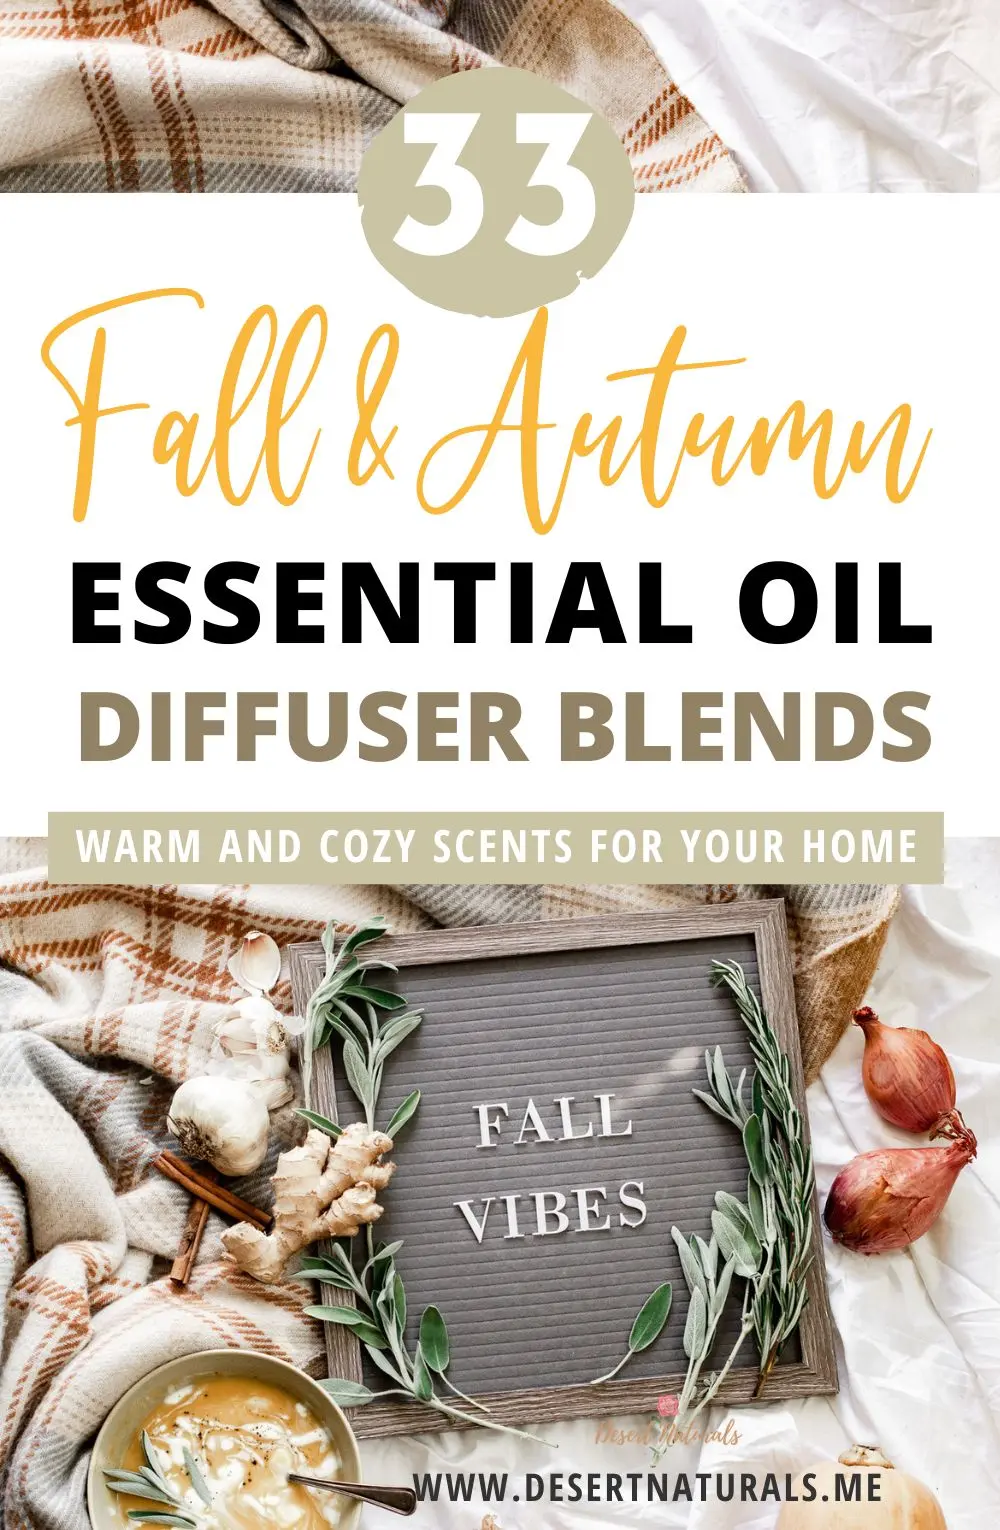 fall & autumn essential oil diffuser blends with fall vibes sign